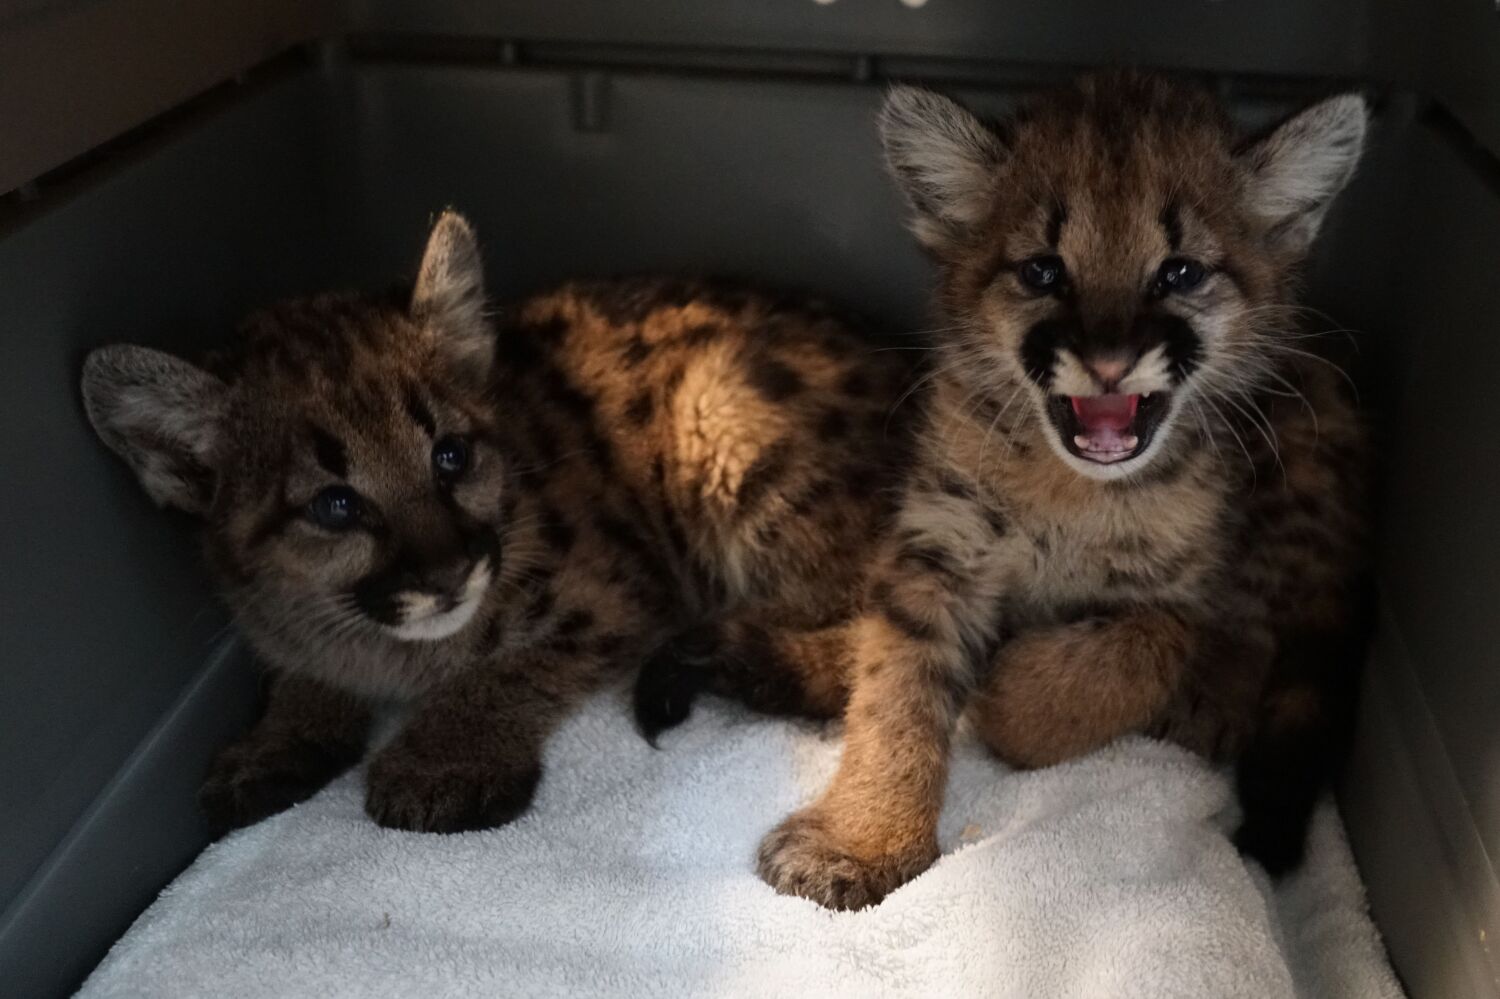 Cougar cubs, raccoons, kitty cats. After rehab, animals hurt by fires find new homes